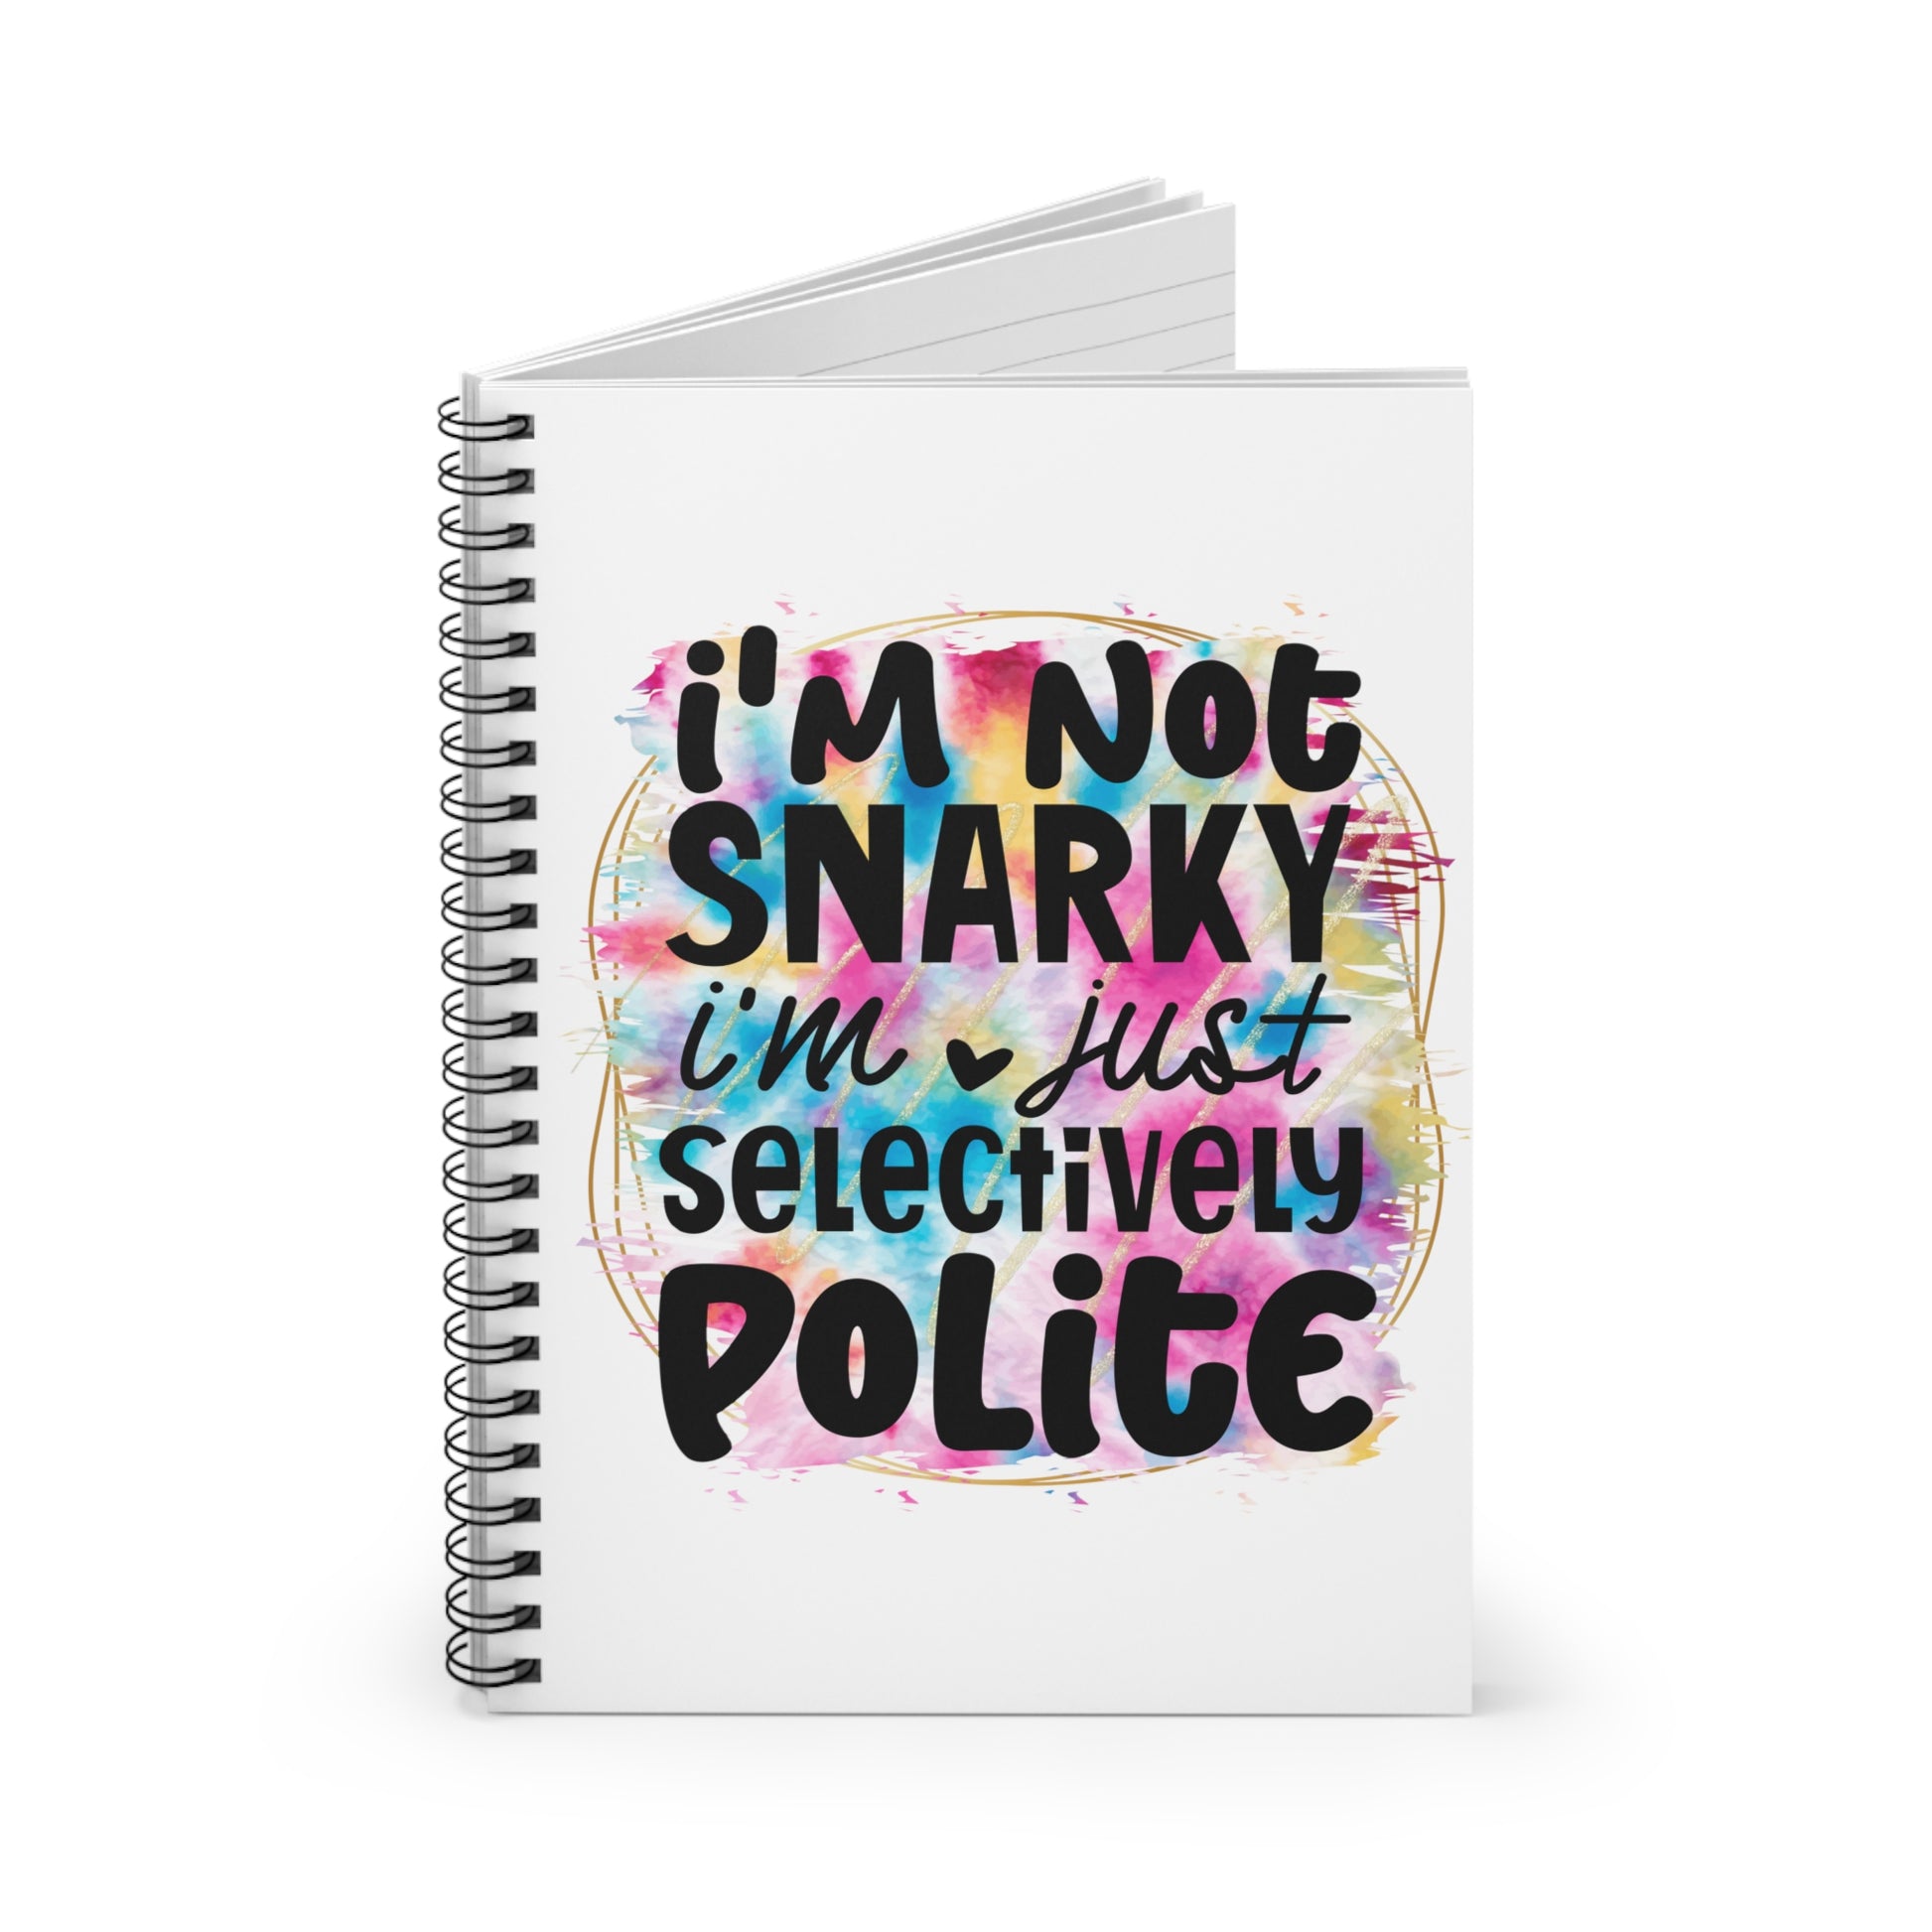 Selectively Polite: Spiral Notebook - Log Books - Journals - Diaries - and More Custom Printed by TheGlassyLass.com